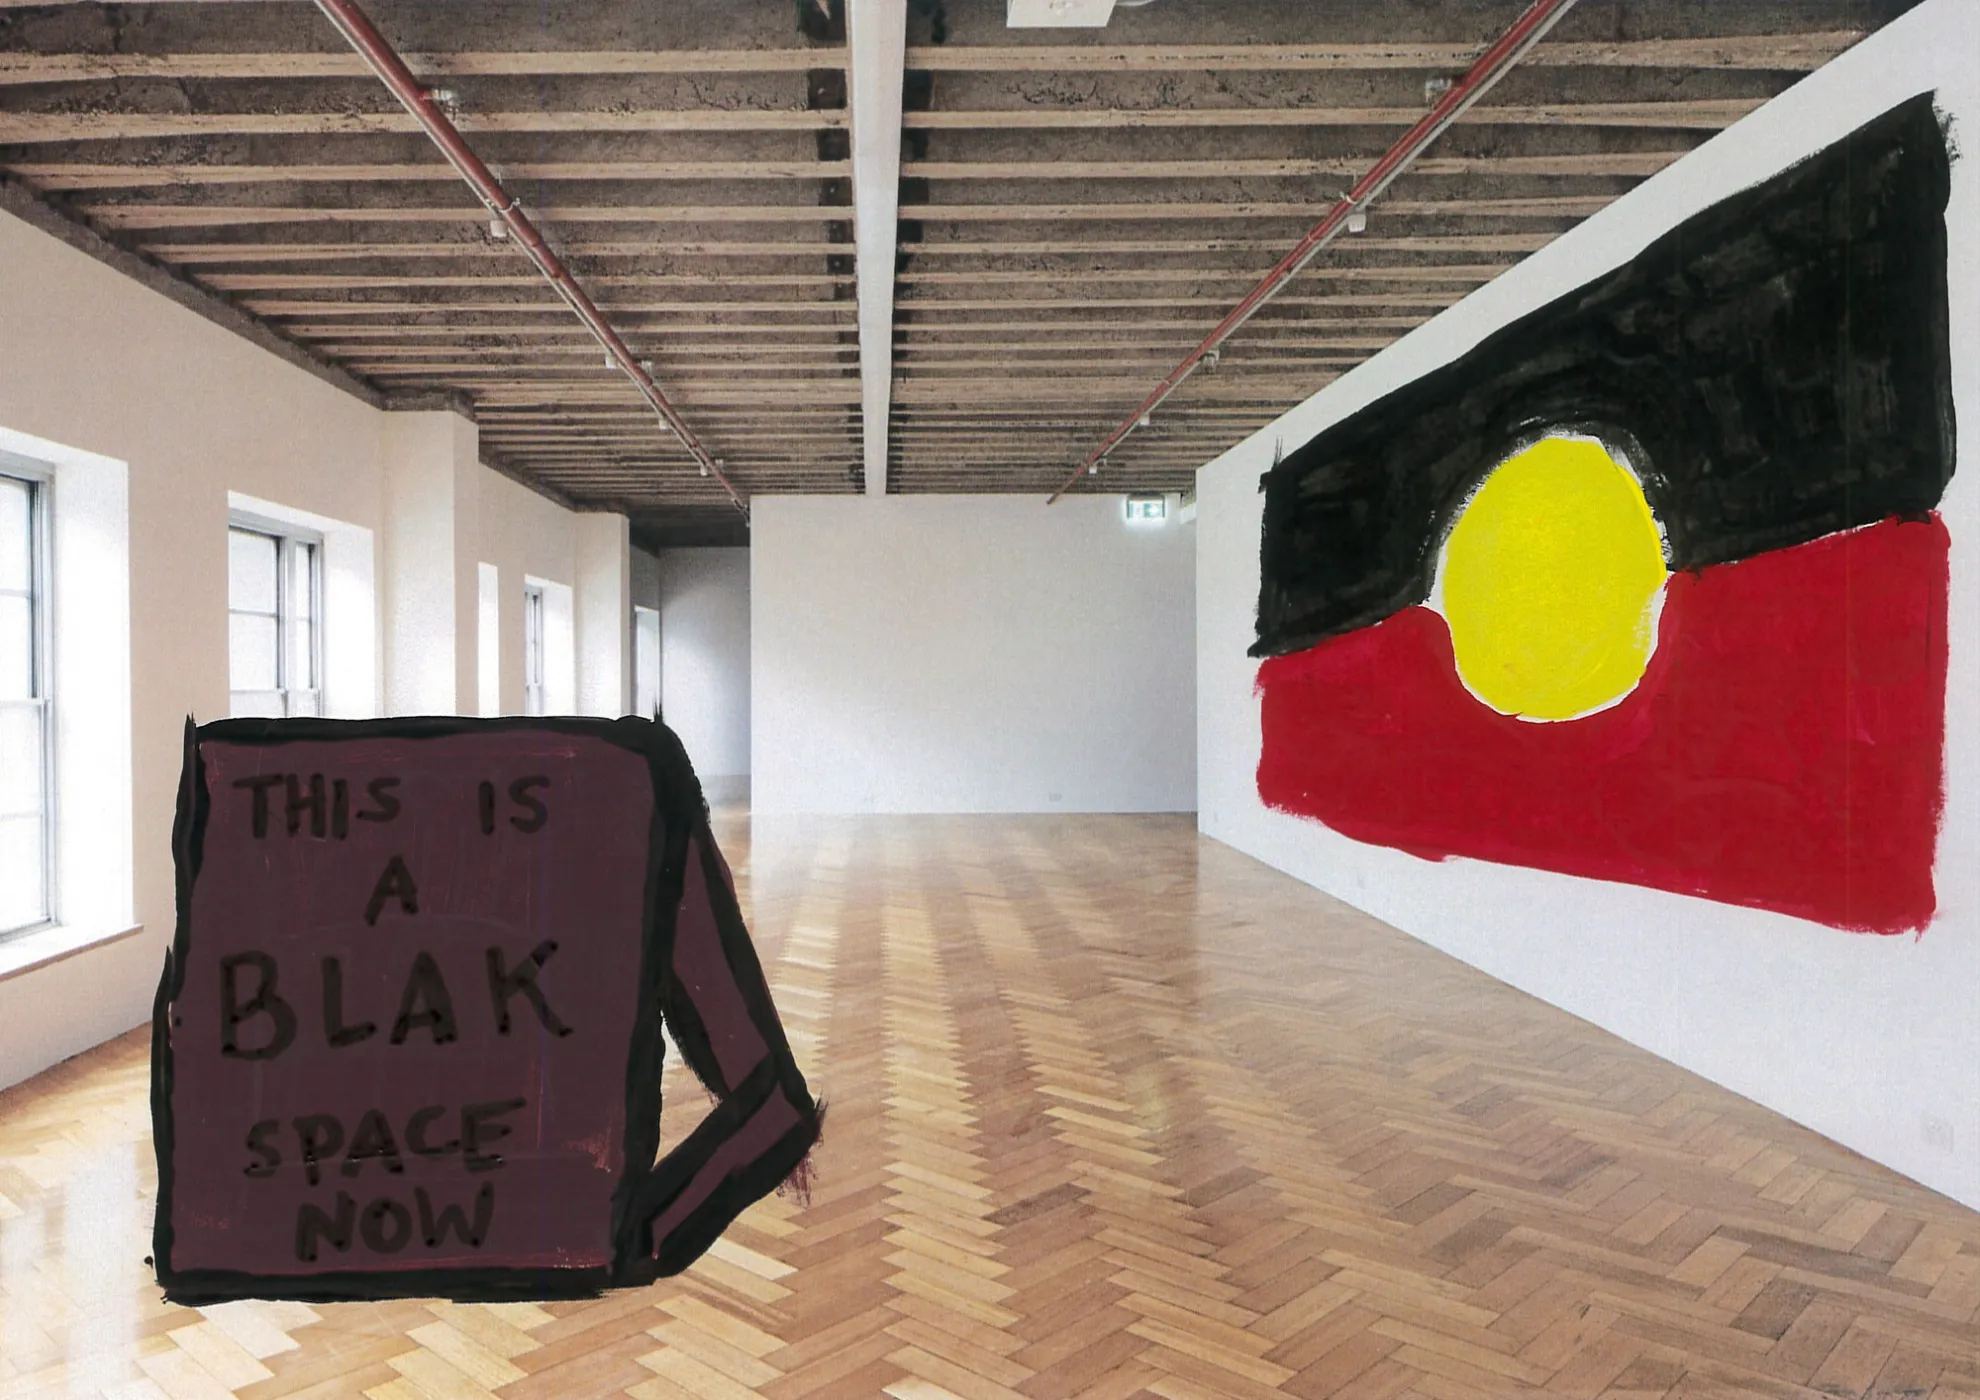 A photo of West Space's white walled gallery that has been painted over with the Aboriginal flag on the wall and a sign on the floor that reads "THIS IS A BLACK SPACE NOW".